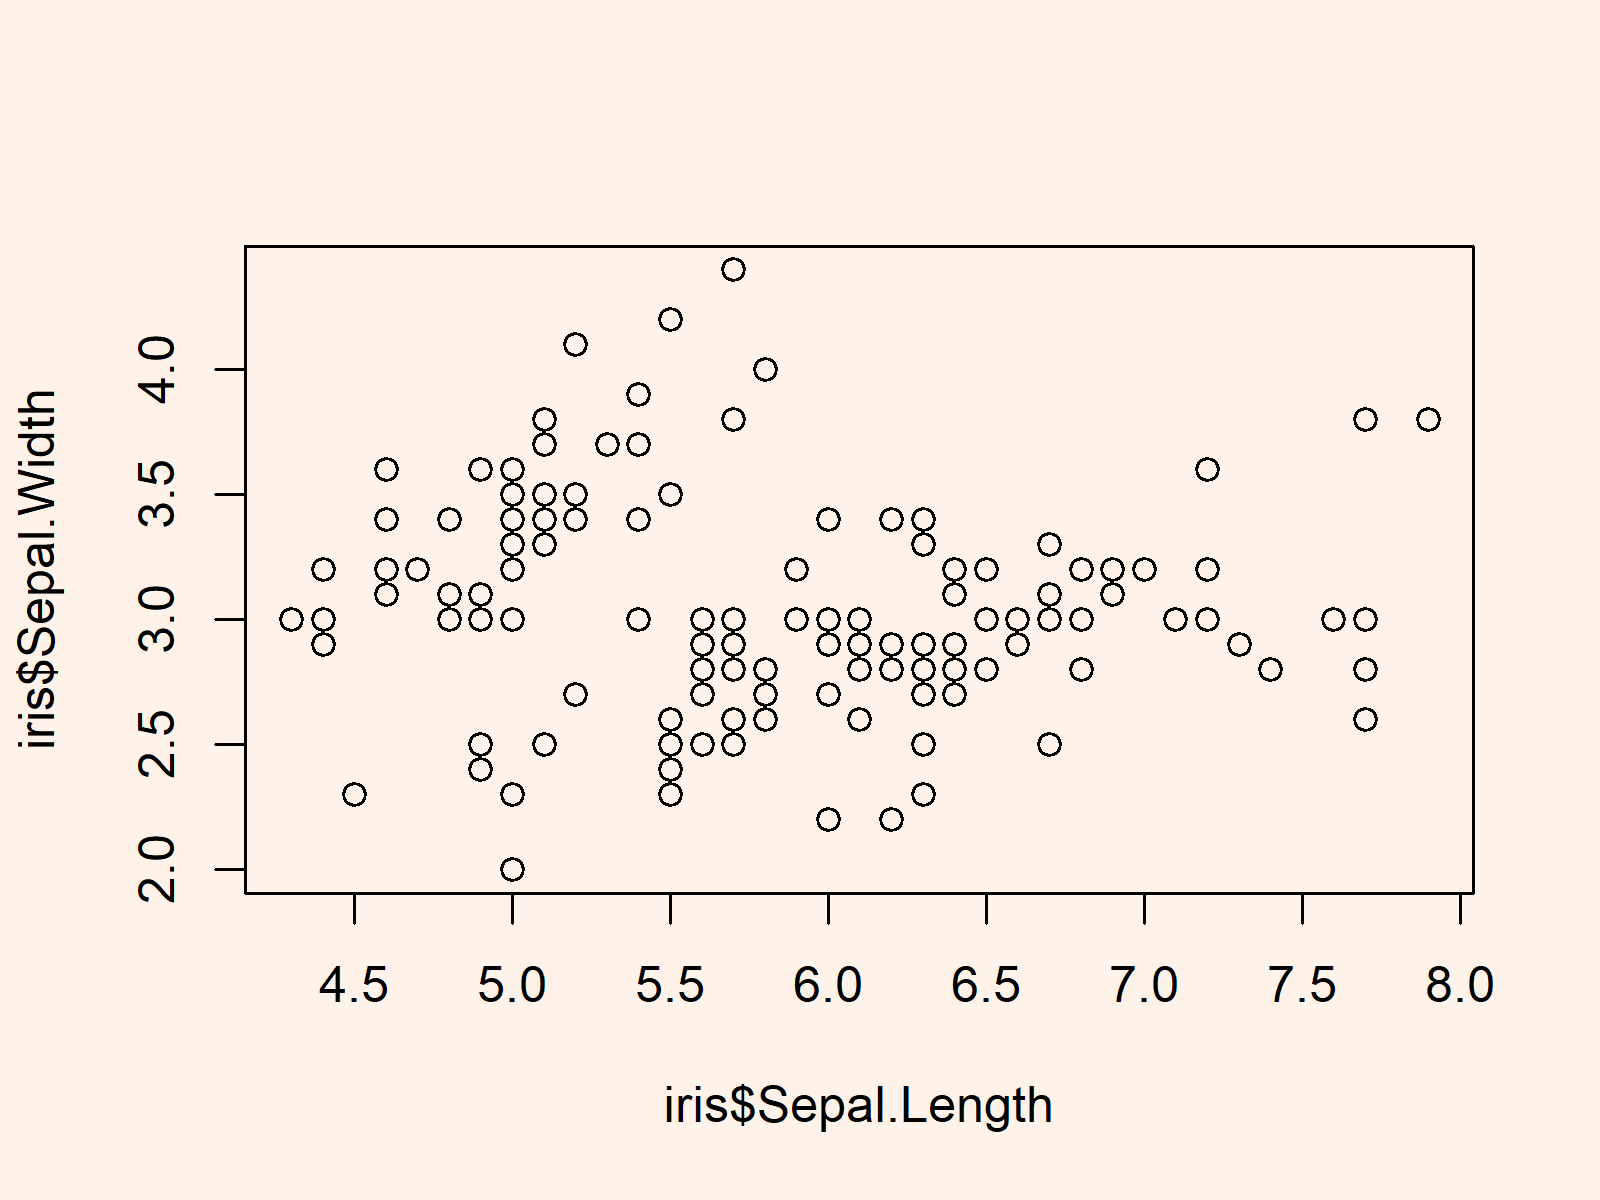 r graph figure 1 using real values as axis ticks r